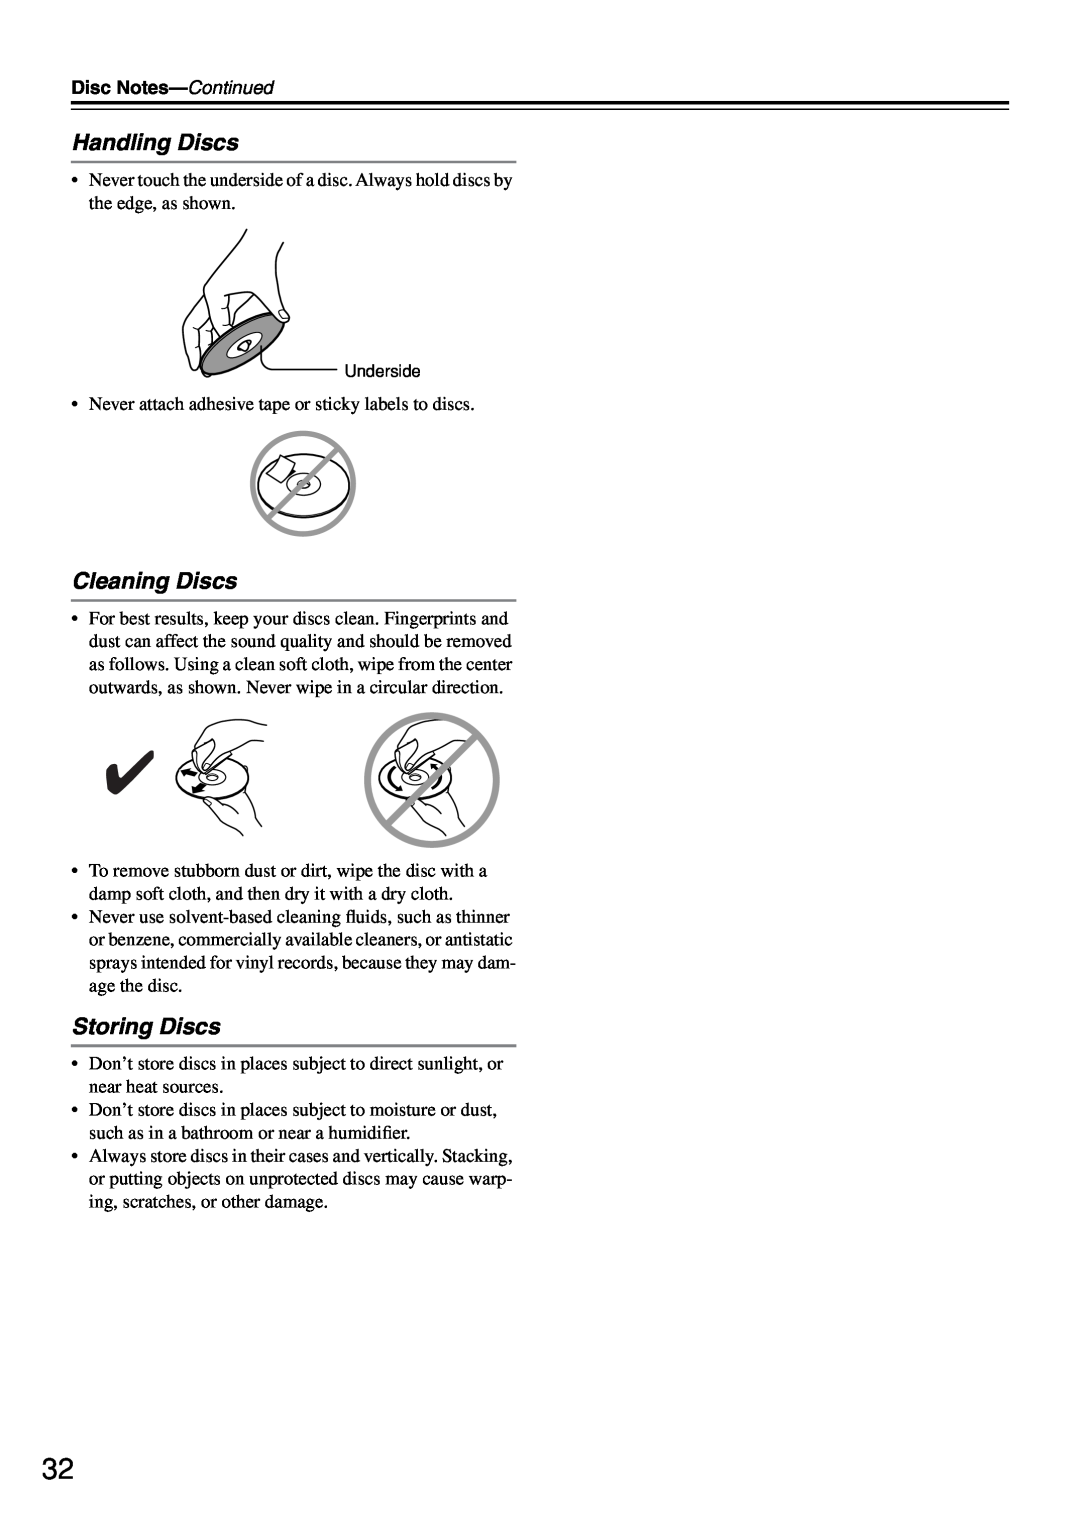 Onkyo CR-505 instruction manual Handling Discs, Cleaning Discs, Storing Discs, Disc Notes-Continued 